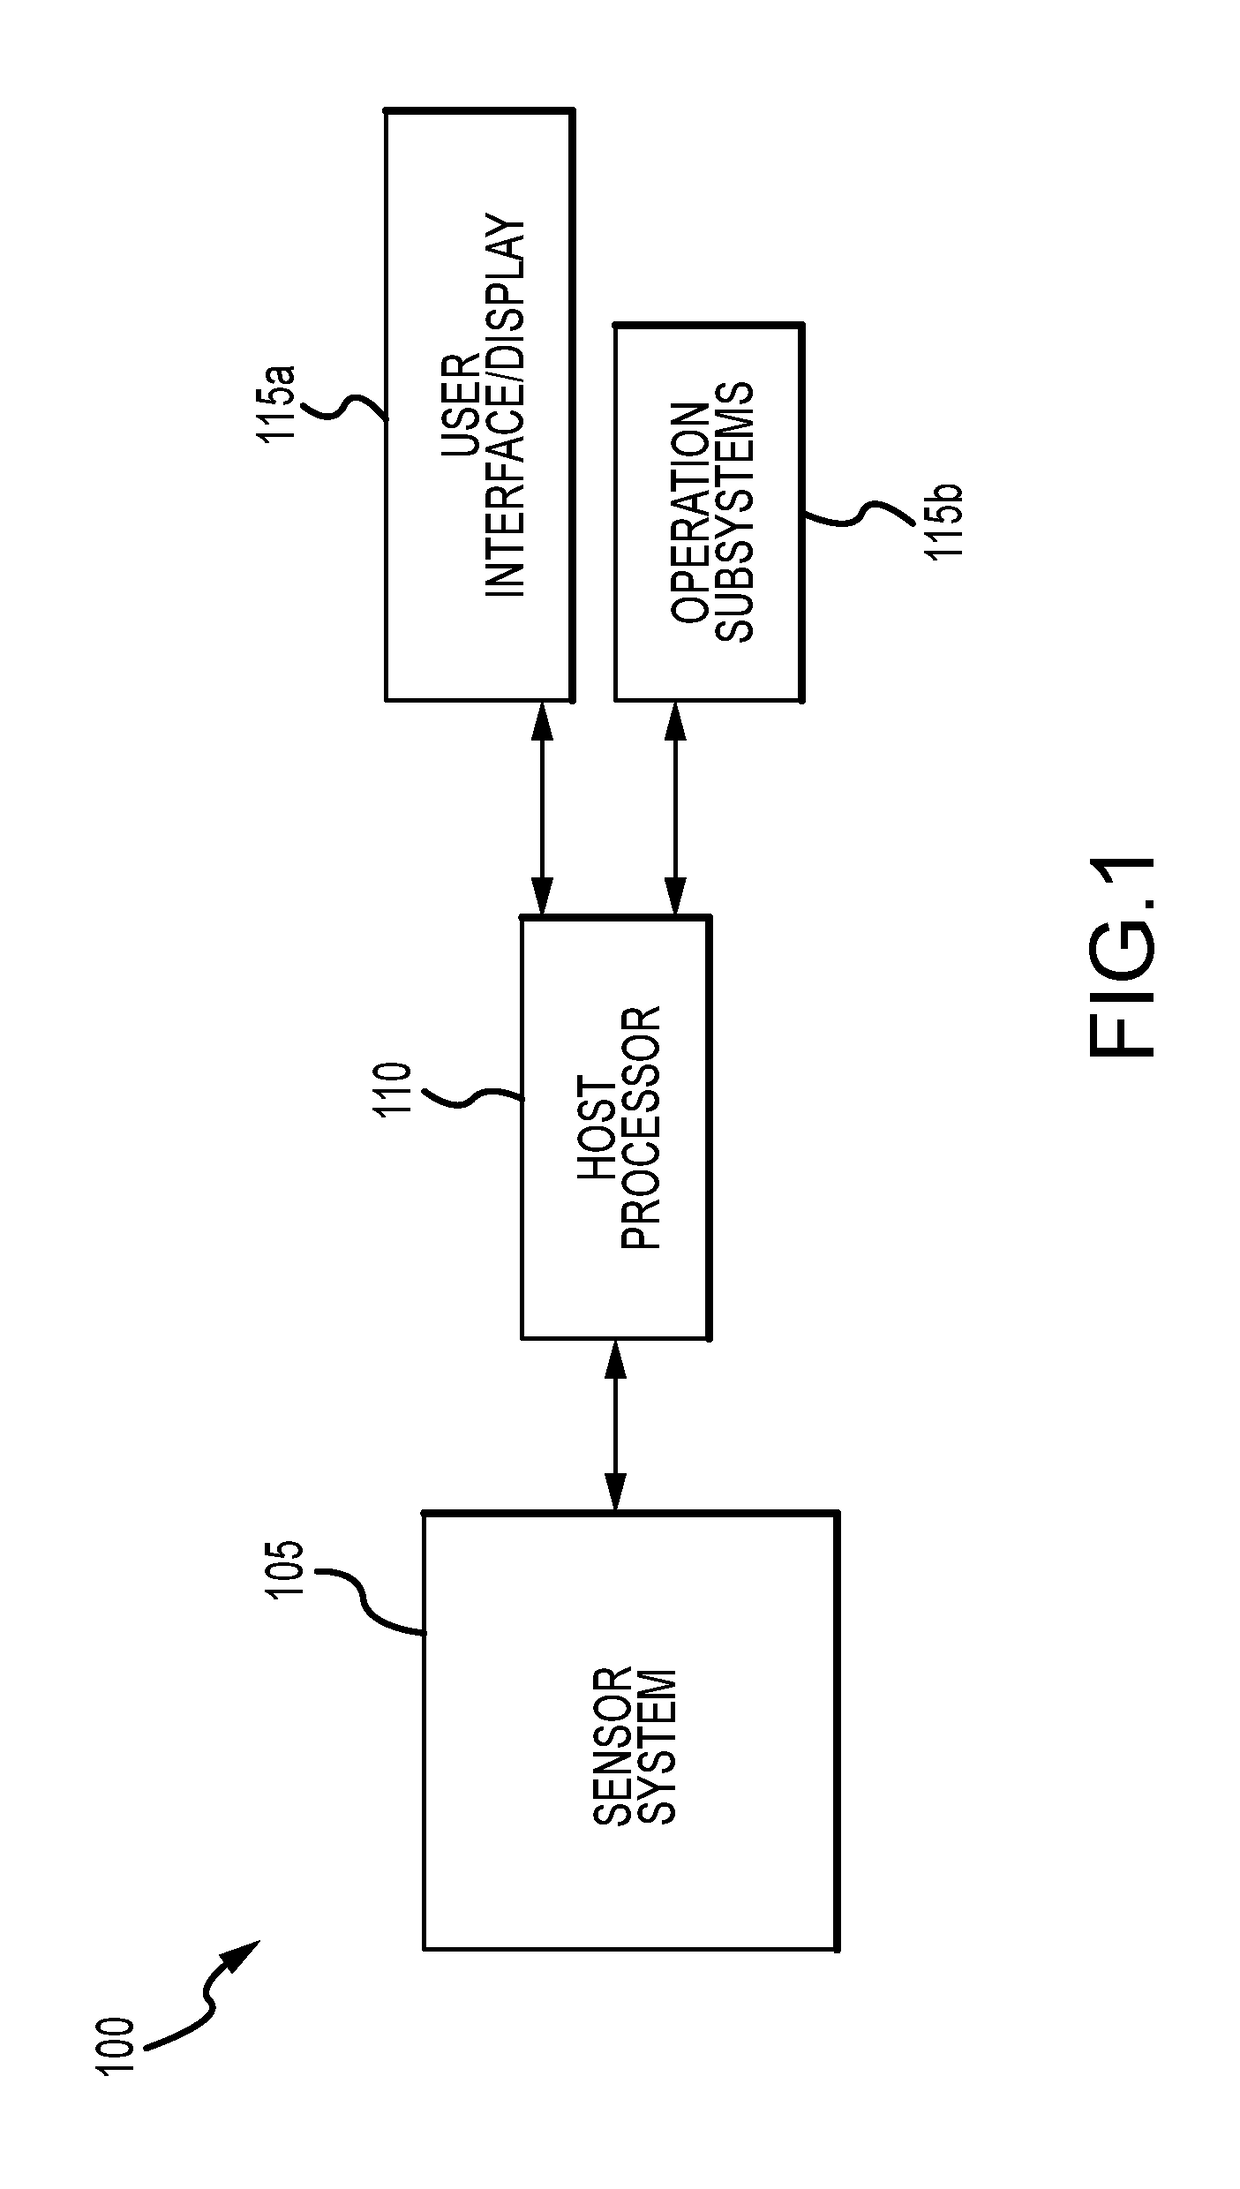 Methods and apparatus for a password-protected integrated circuit